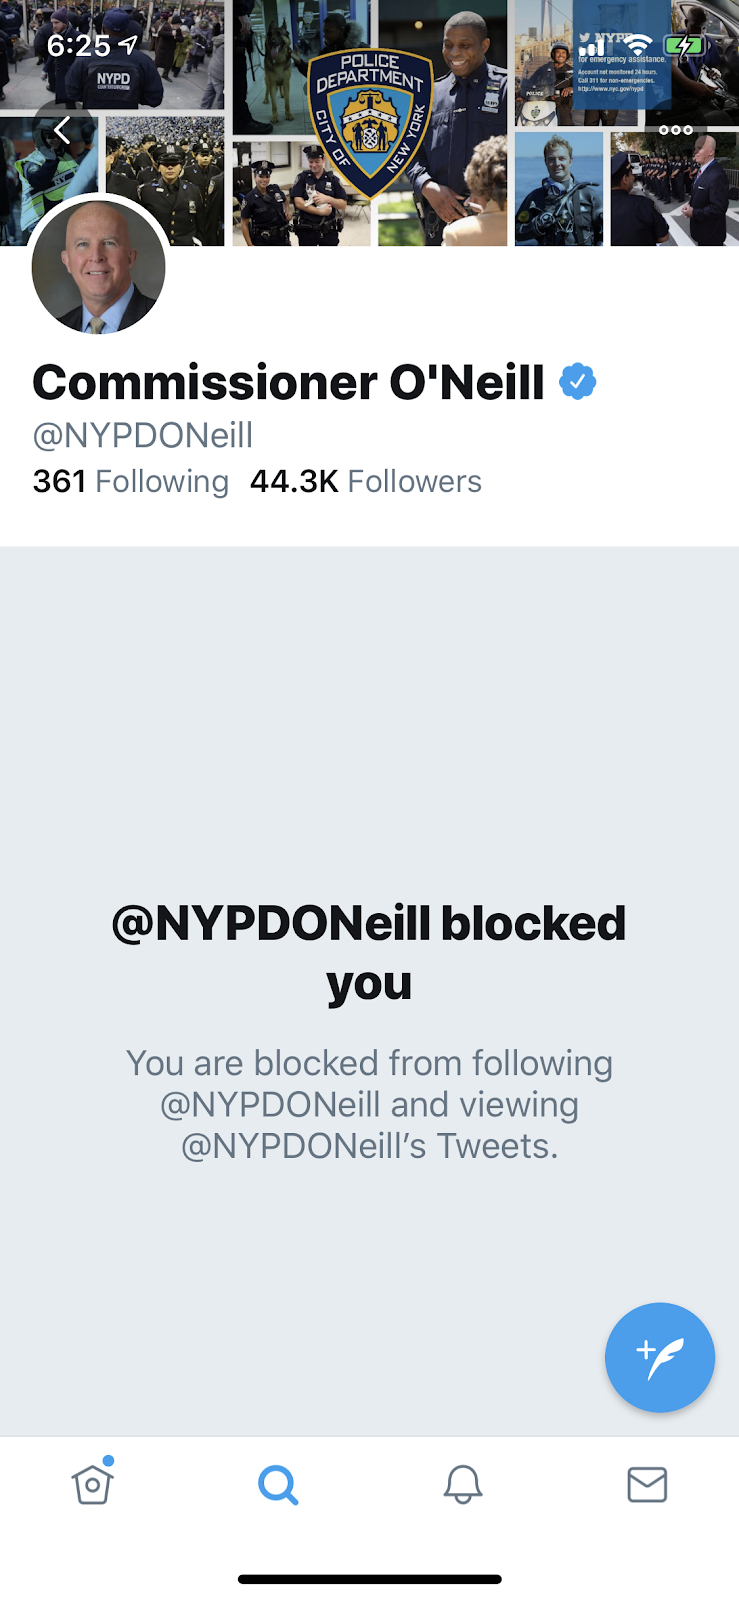 NYPD PC O'Neill Blocks Me on Twitter Protecting Serious Crimes!